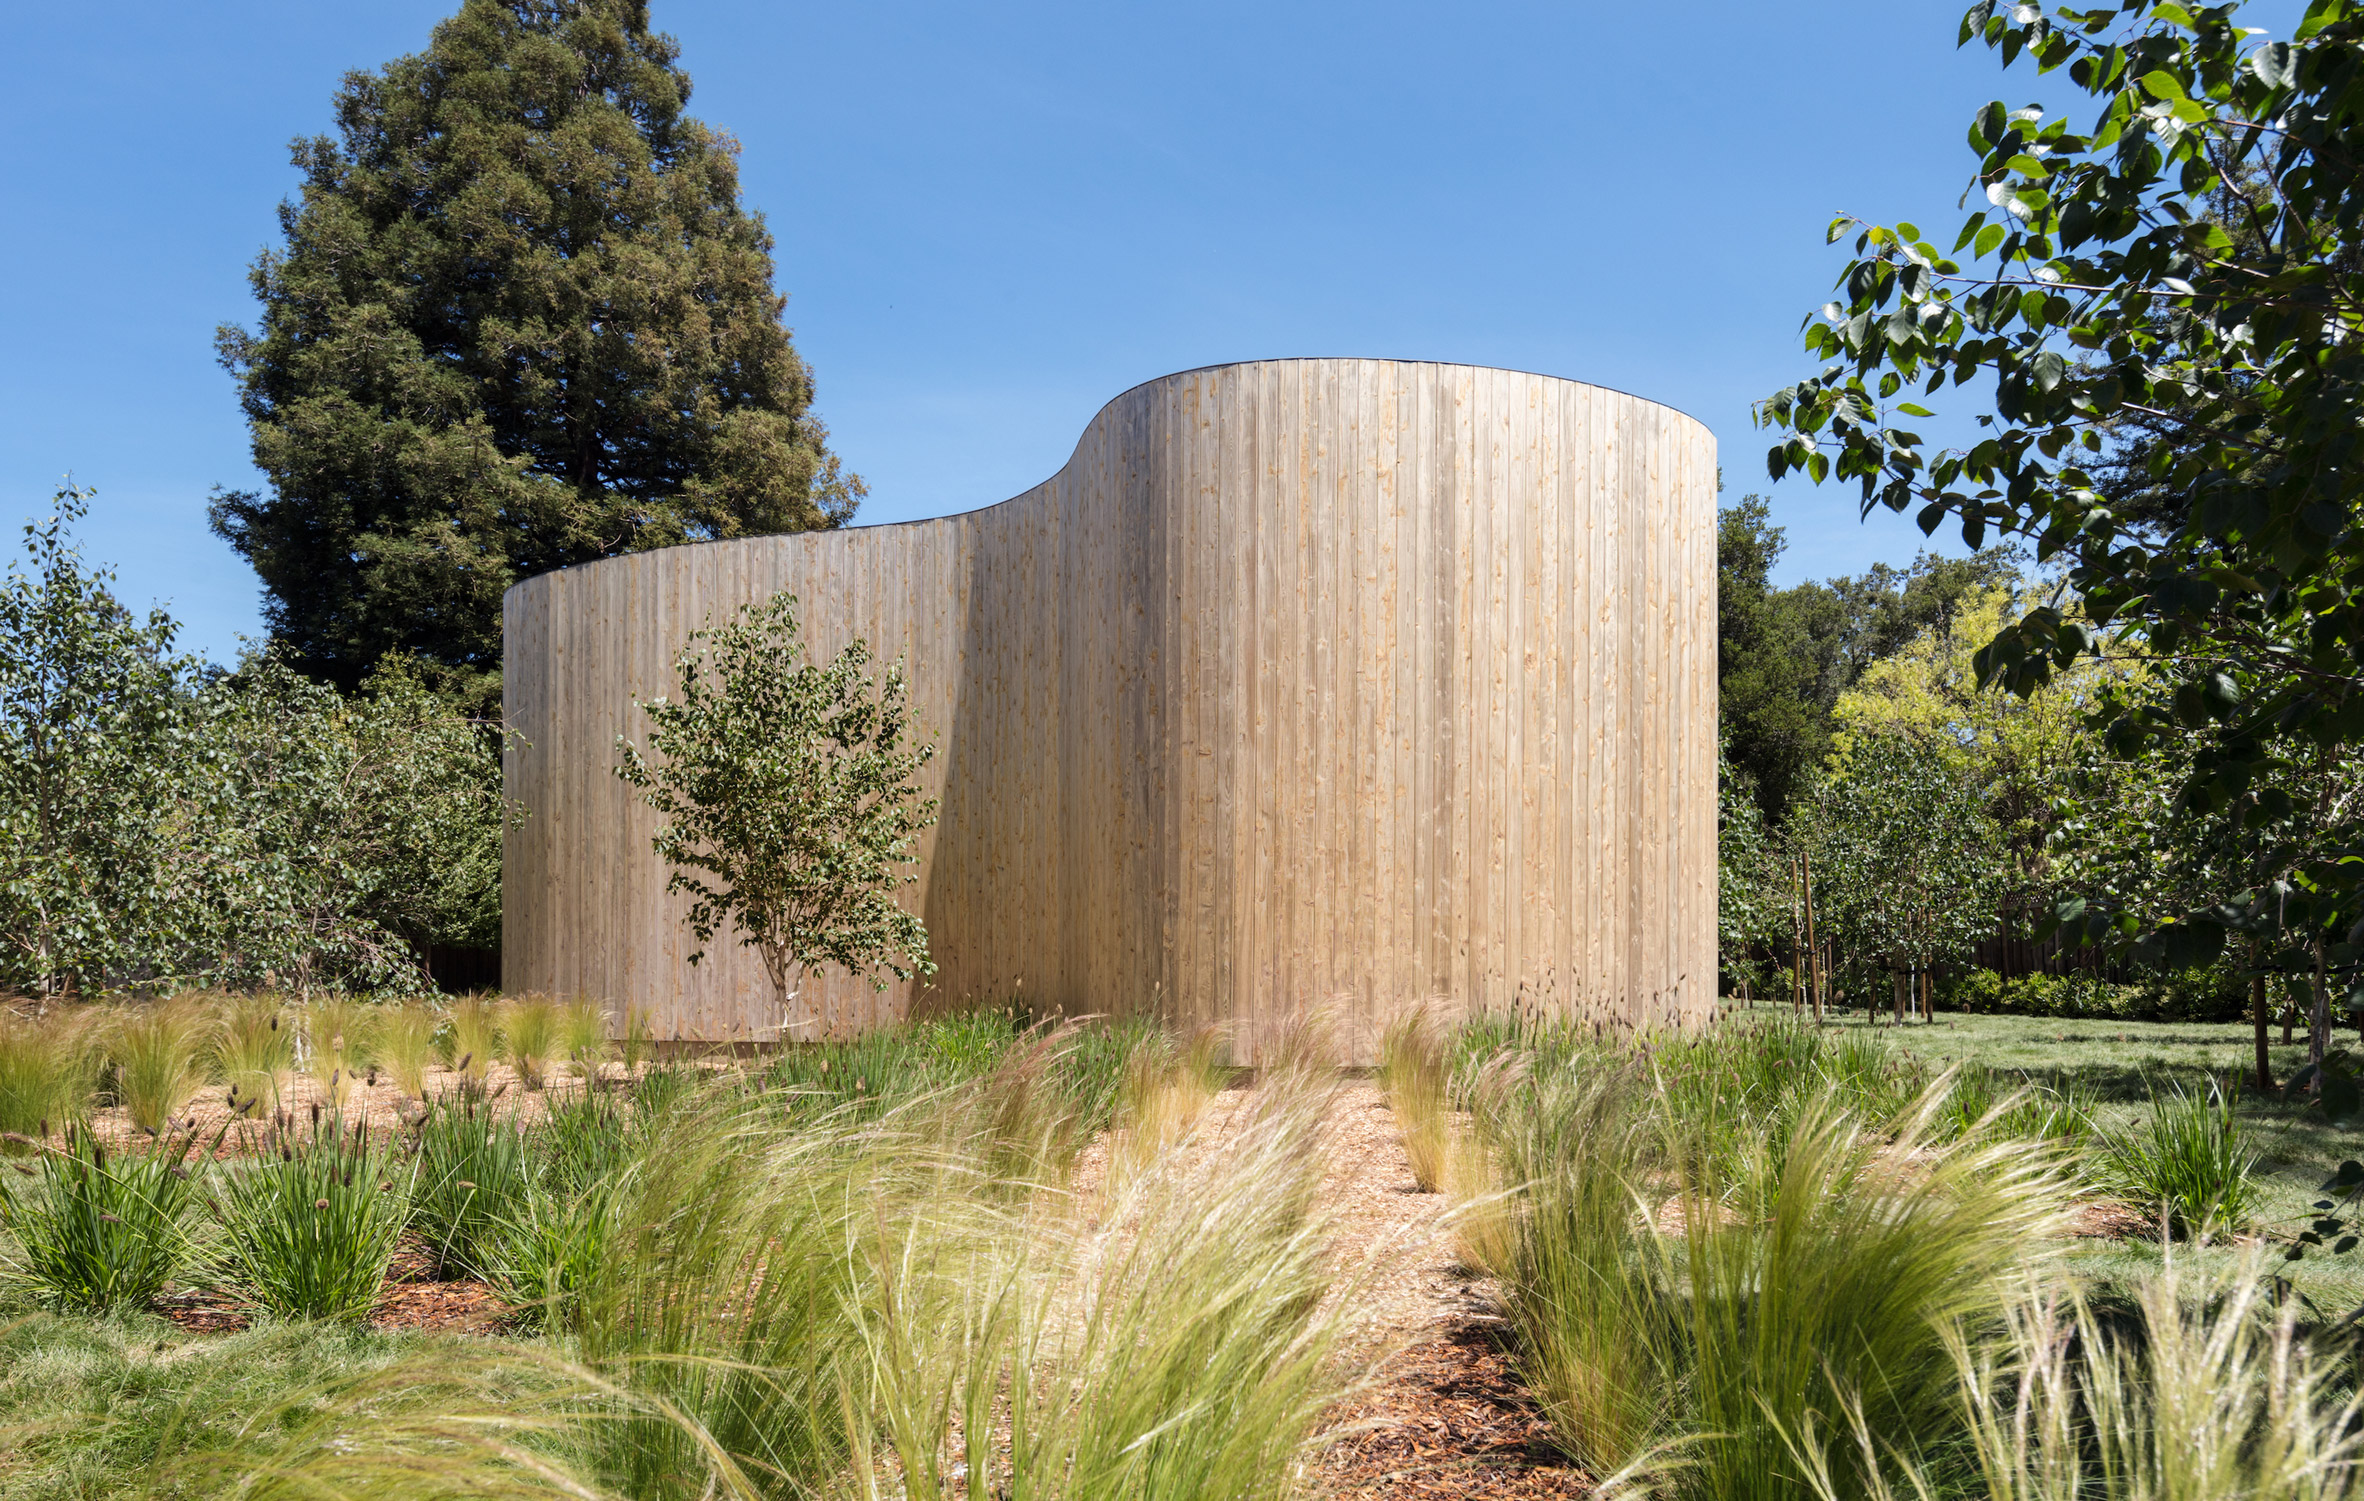 Craig Steely surrounds Roofless House in Silicon Valley with sinuous wooden wall